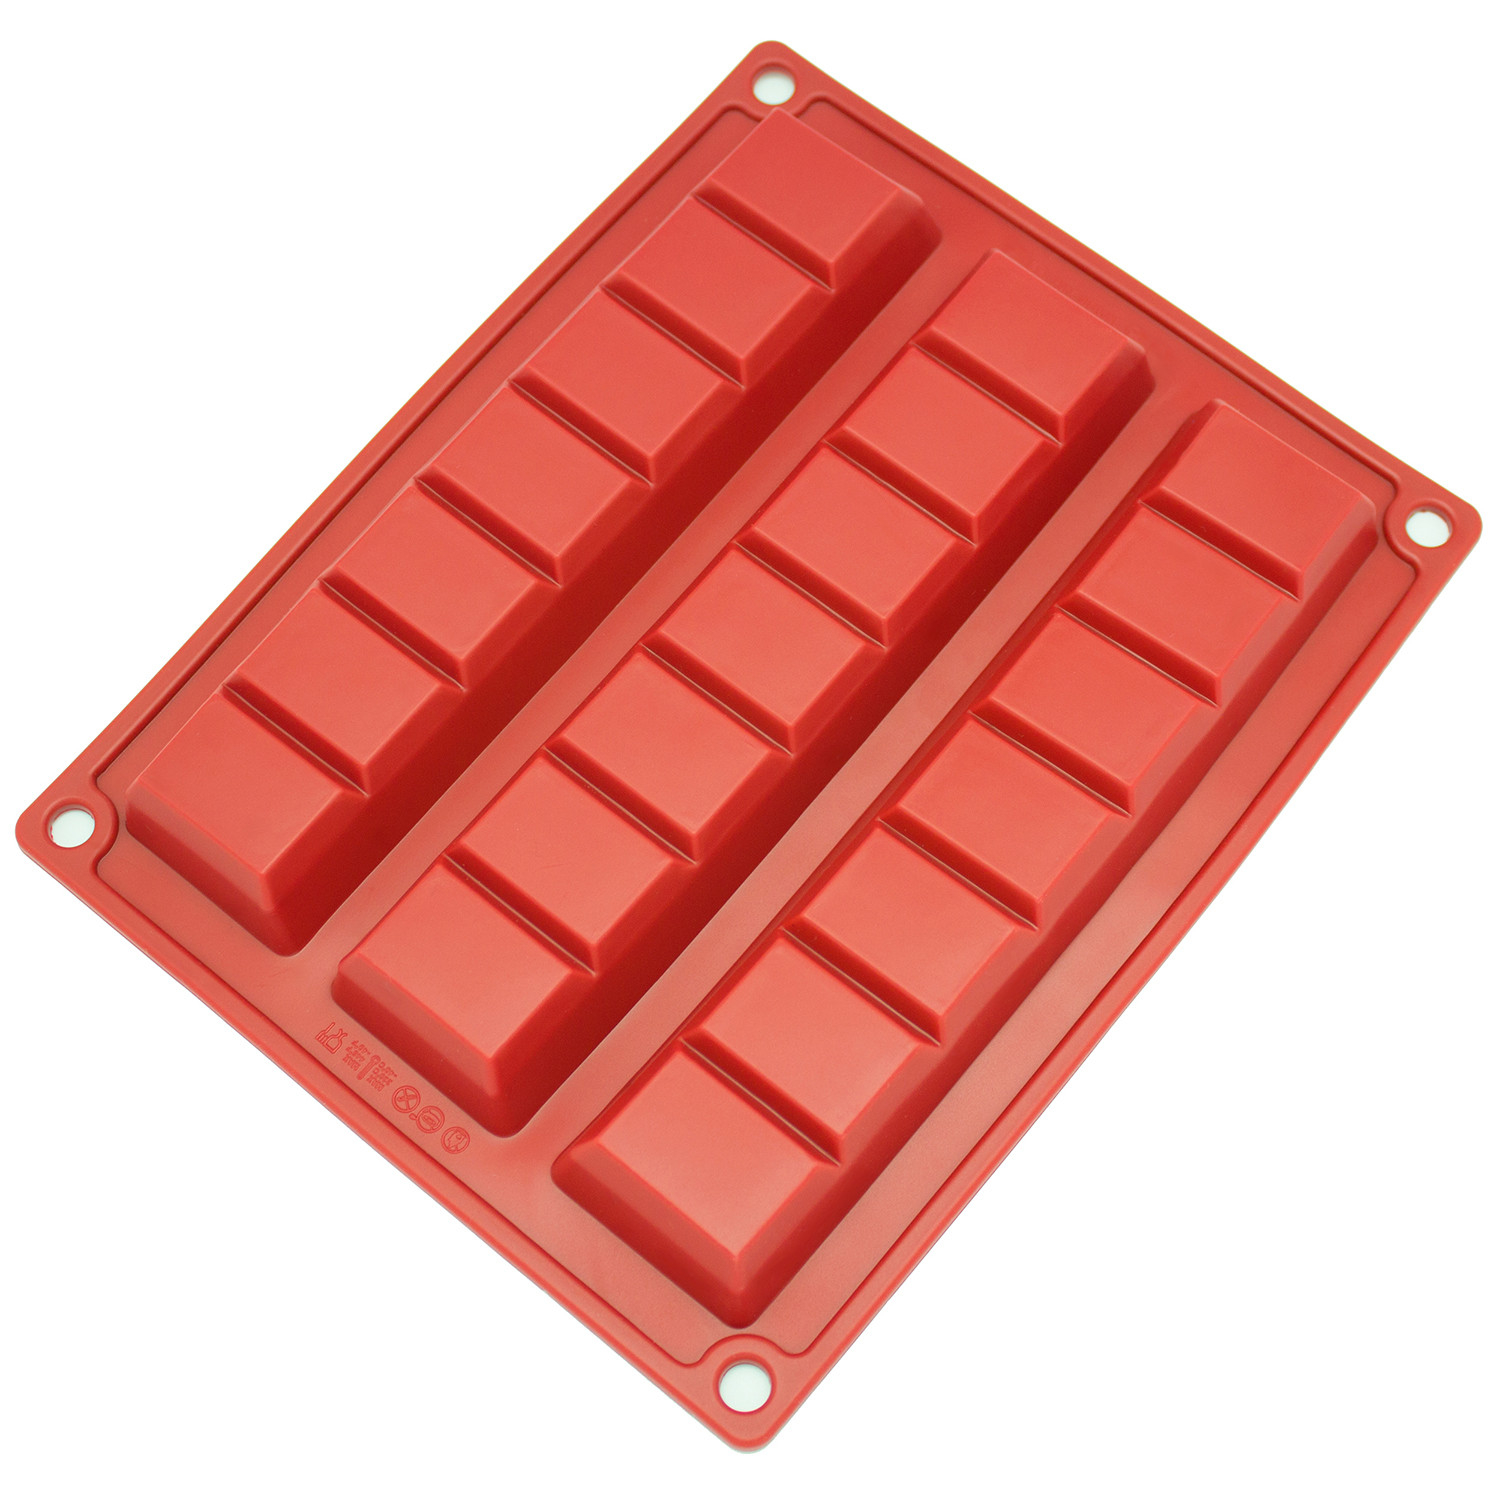 Freshware Silicone Mold, Chocolate Mold for Chocolate Bars, Protein Bars and Energy Bars, Chunk, Break-Apart, 3-Cavity